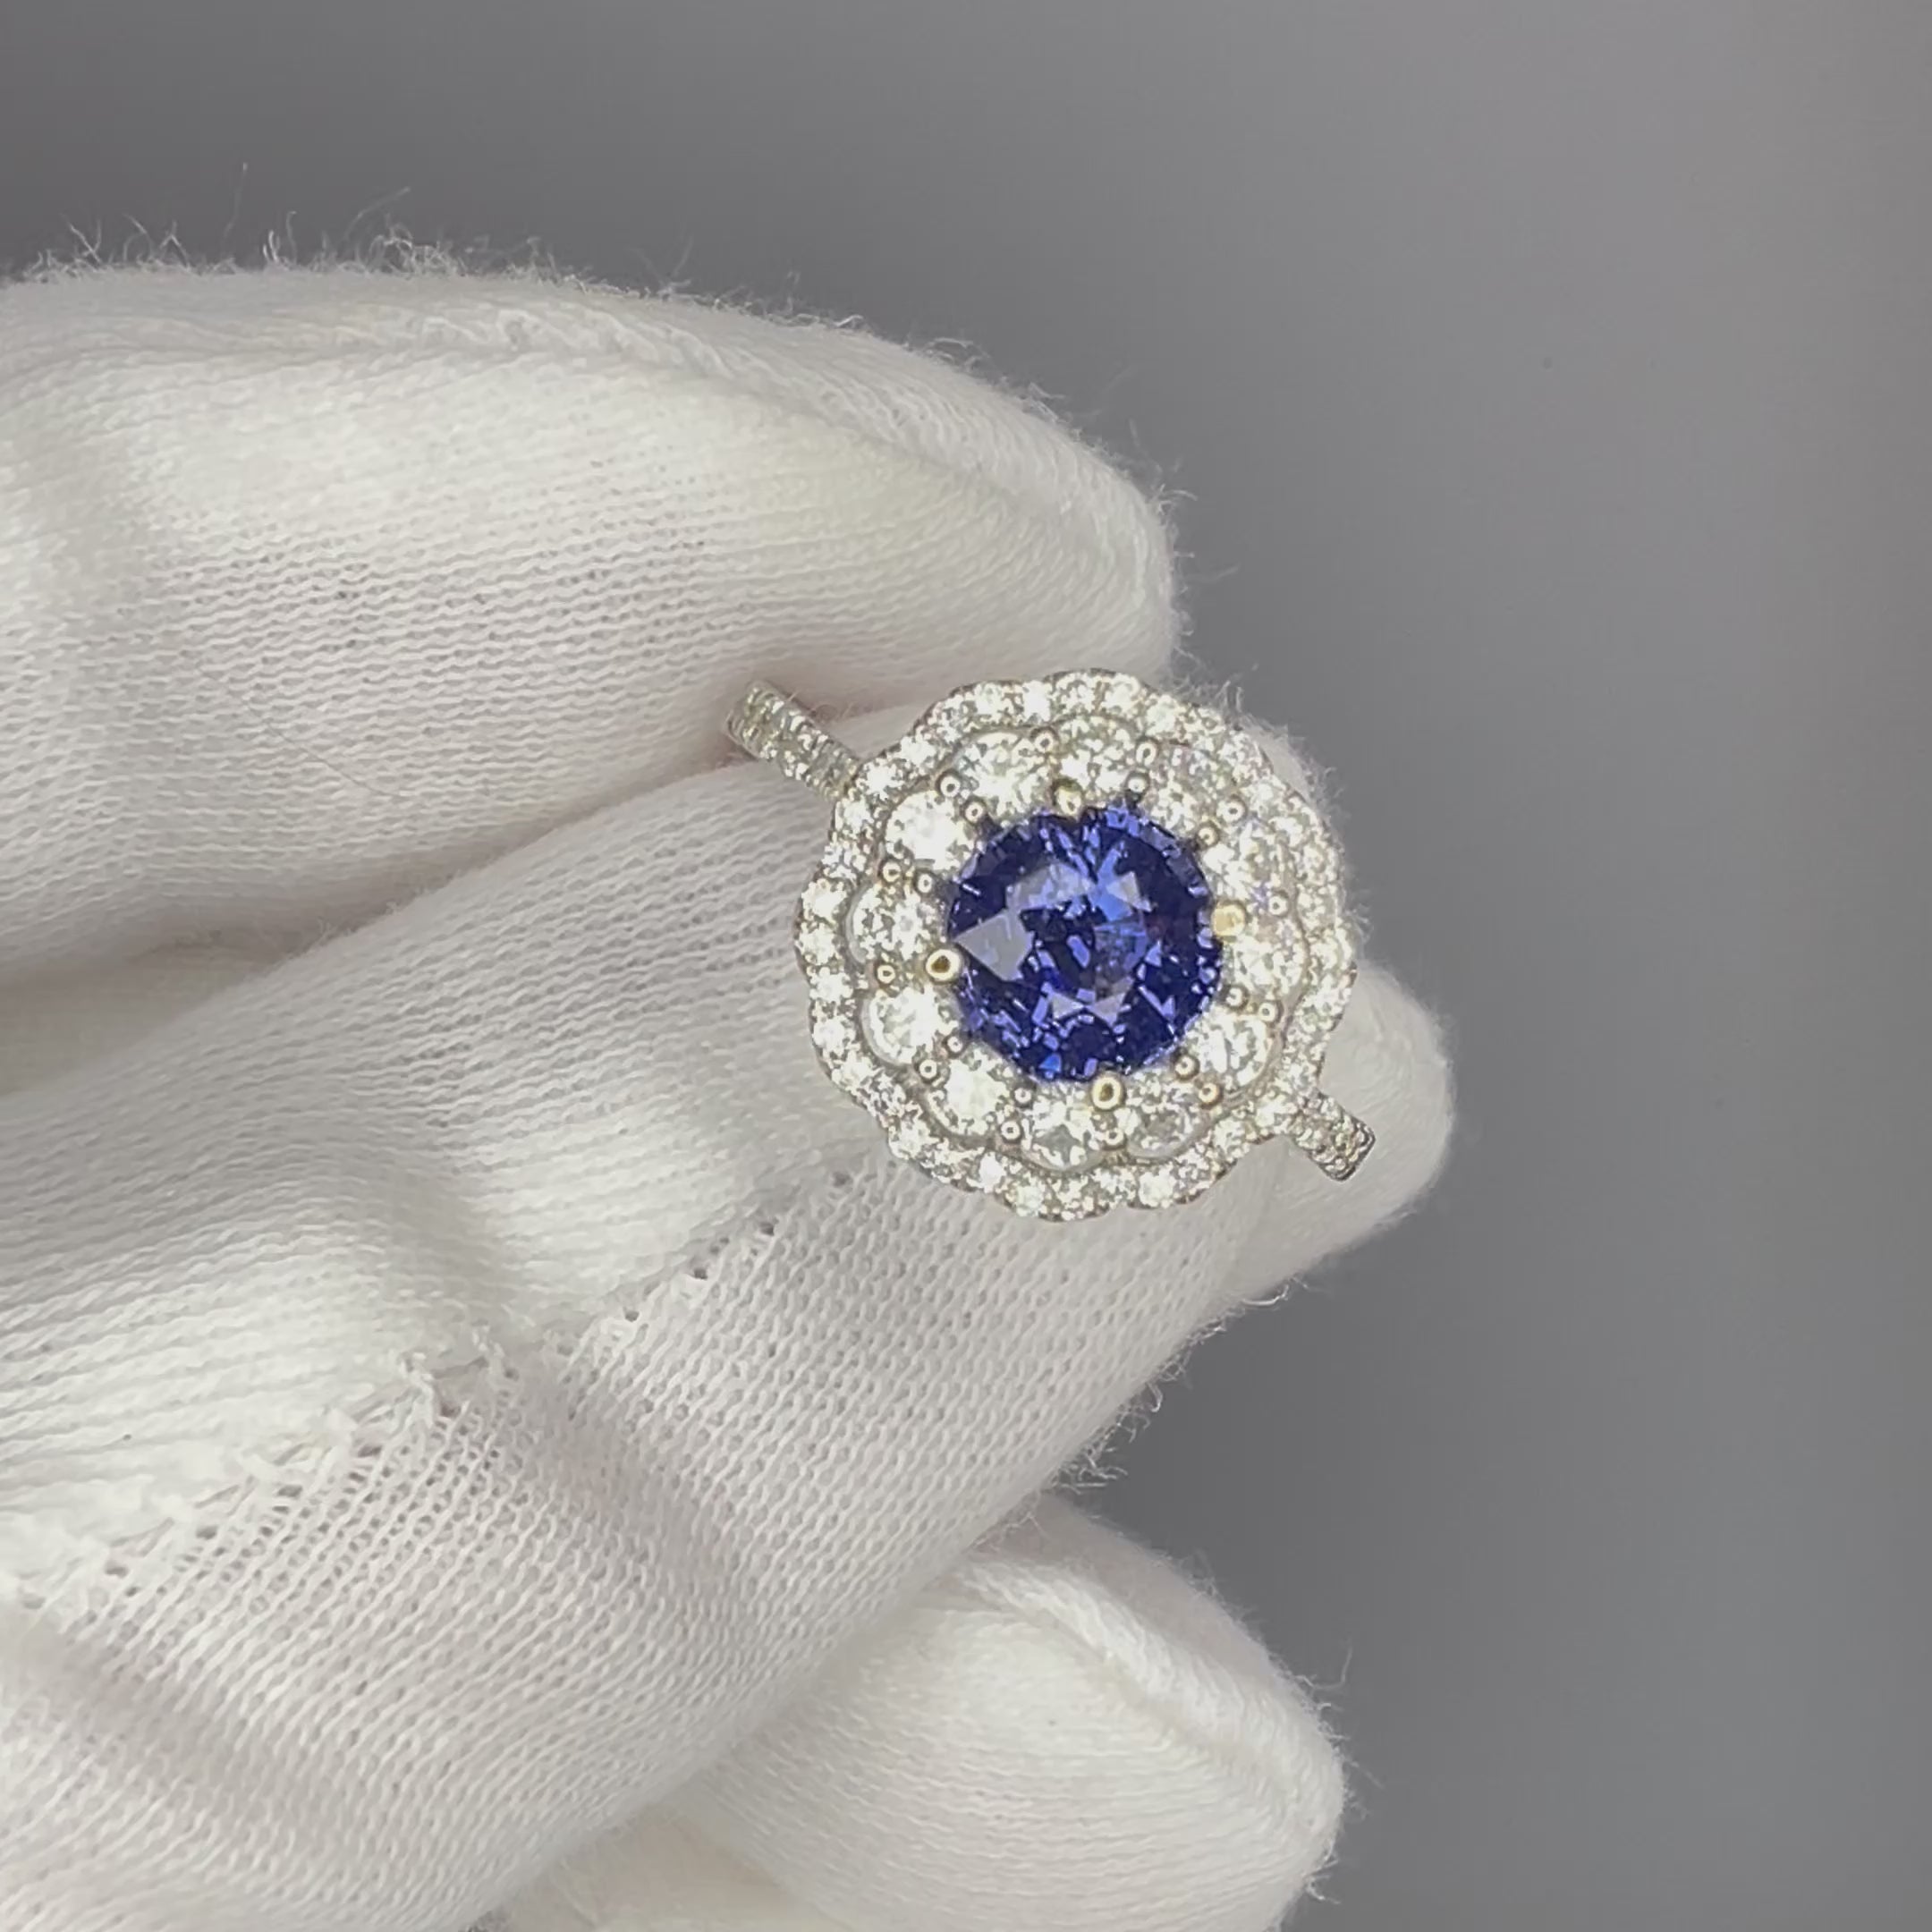 Blue Spinel Engagement Ring in white gold held by white glove